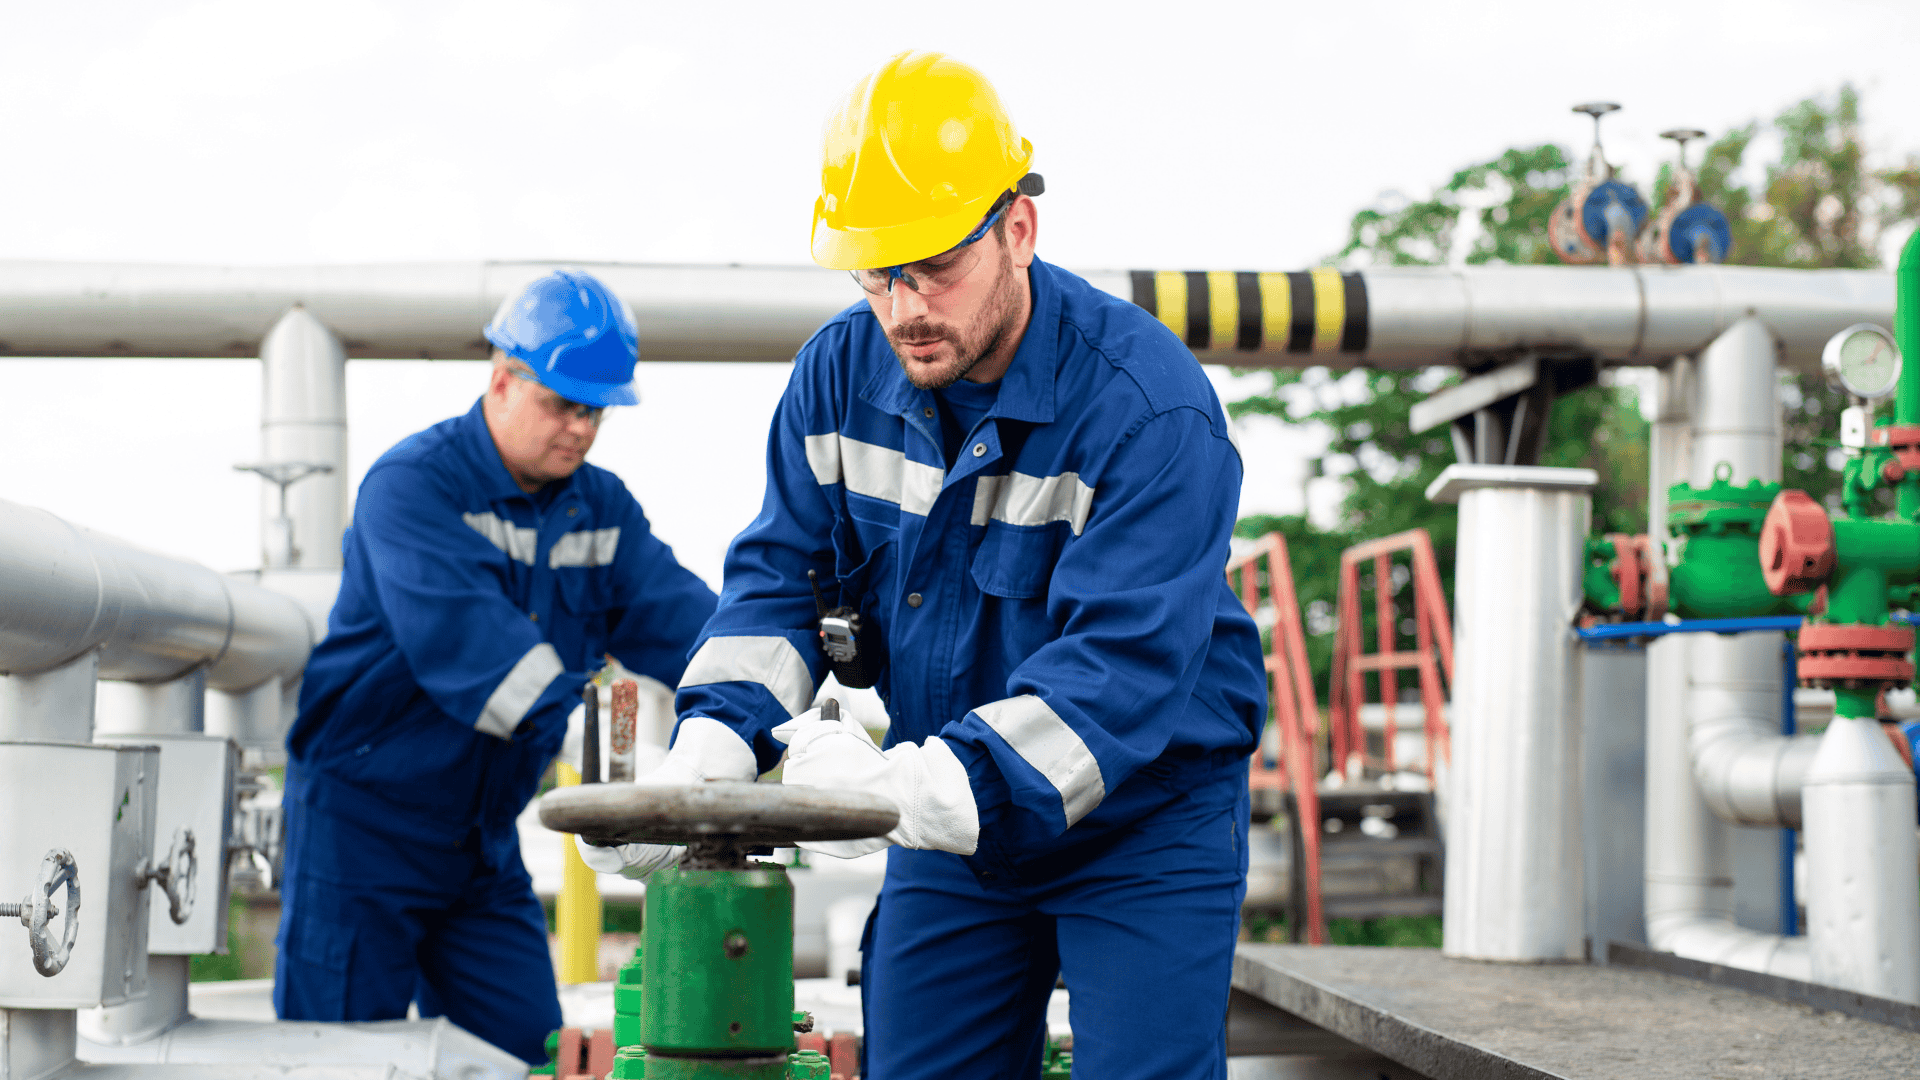 Through the internet of things via remote support, the oil and gas industry is gearing up to address skills shortage.